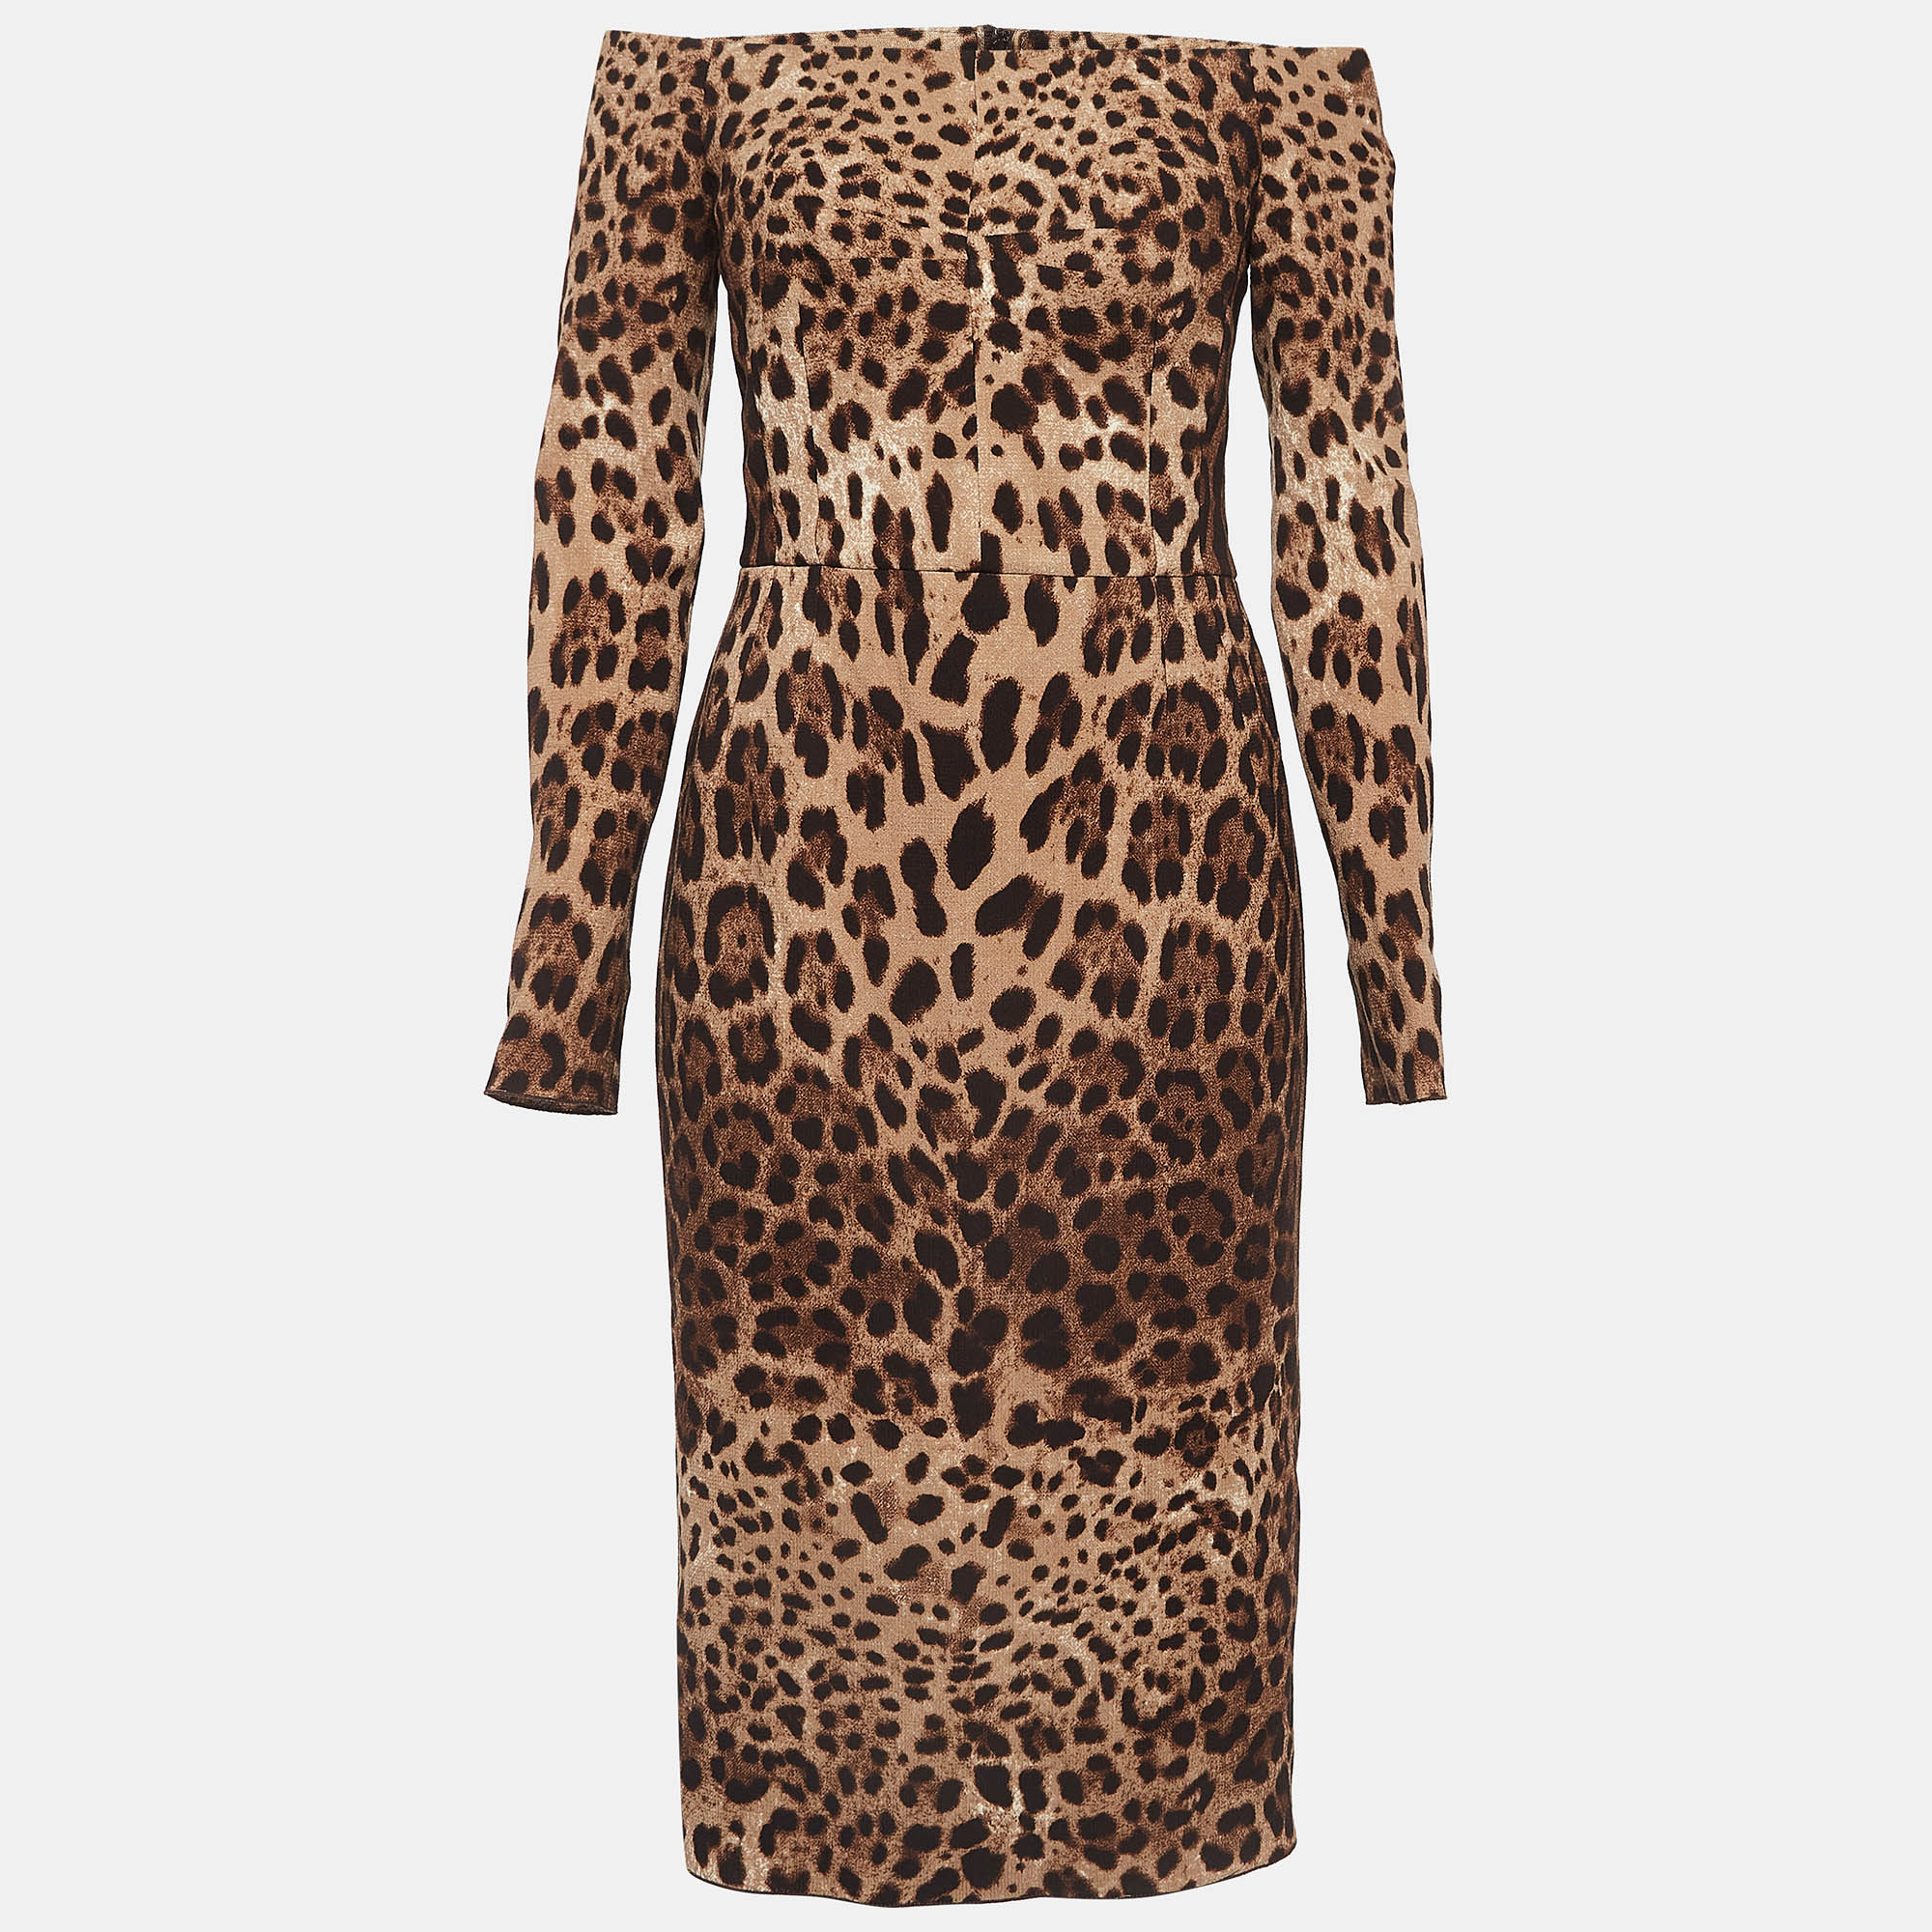 This stylish midi dress exudes elegance and sophistication. Its flattering length falls between the knee and ankle offering a versatile option for various occasions. With its chic design it combines modern trends with timeless charm making it a must have wardrobe staple for fashion forward individuals.